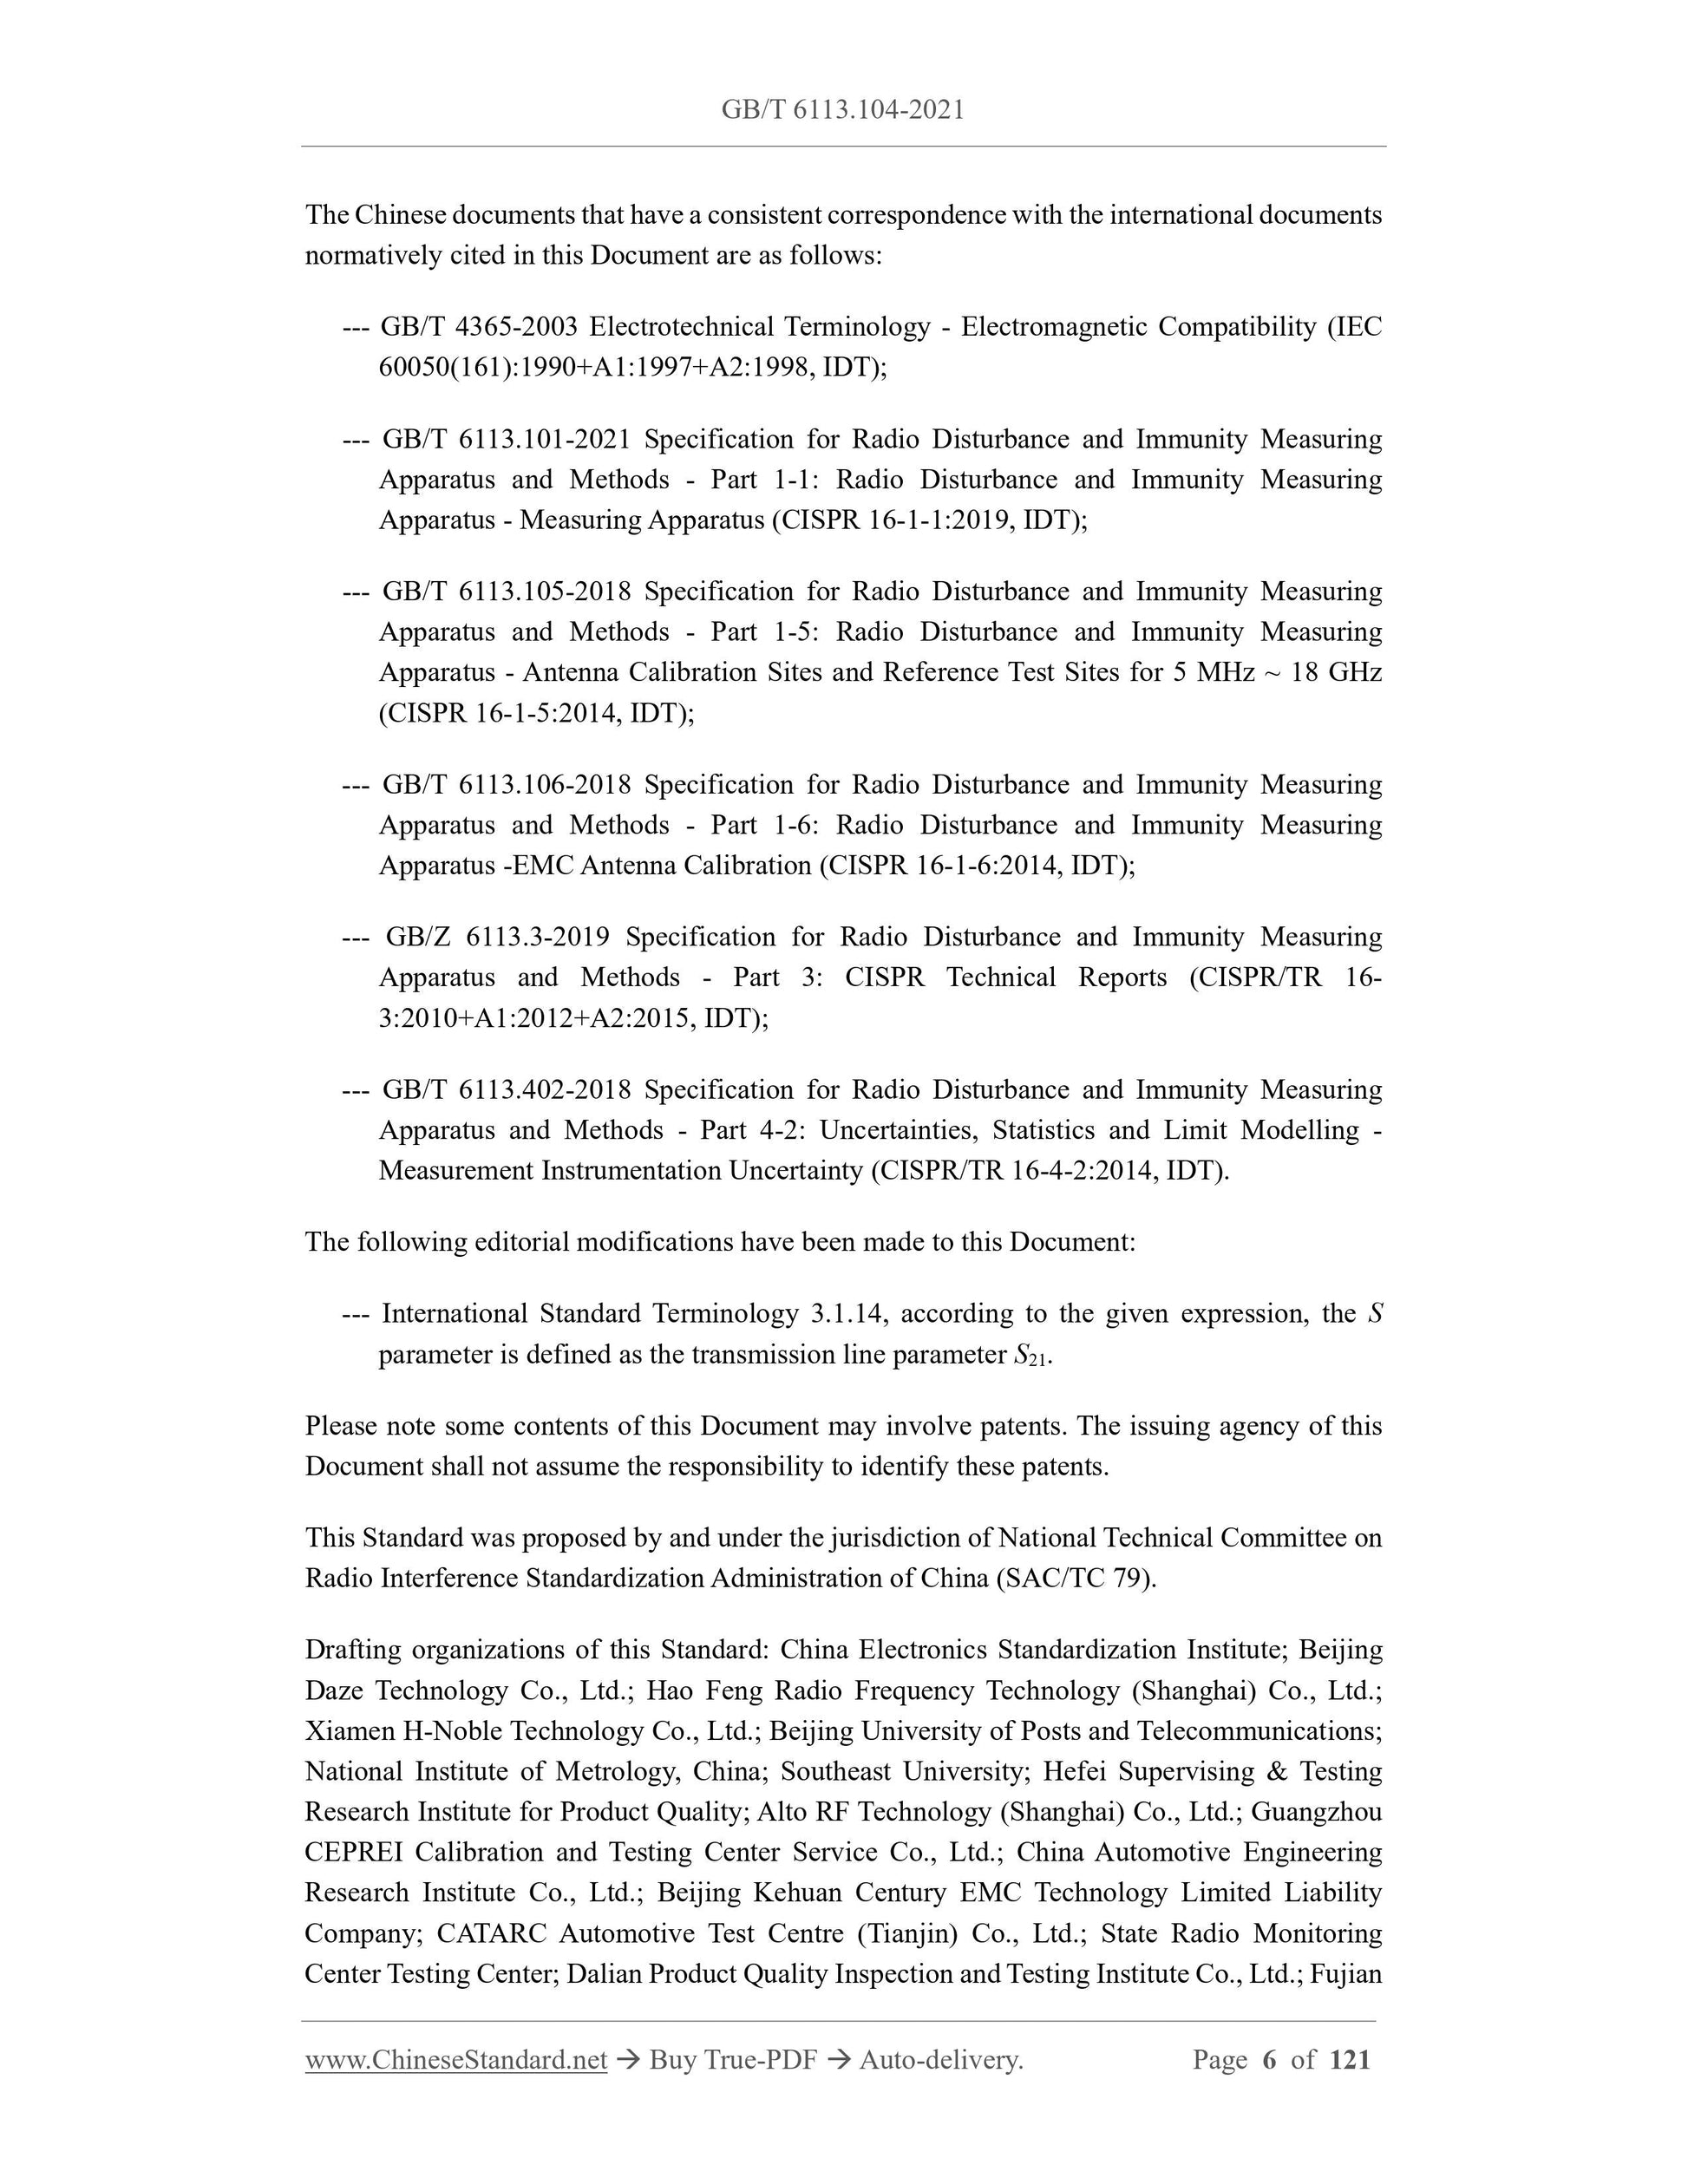 GB/T 6113.104-2021 Page 6